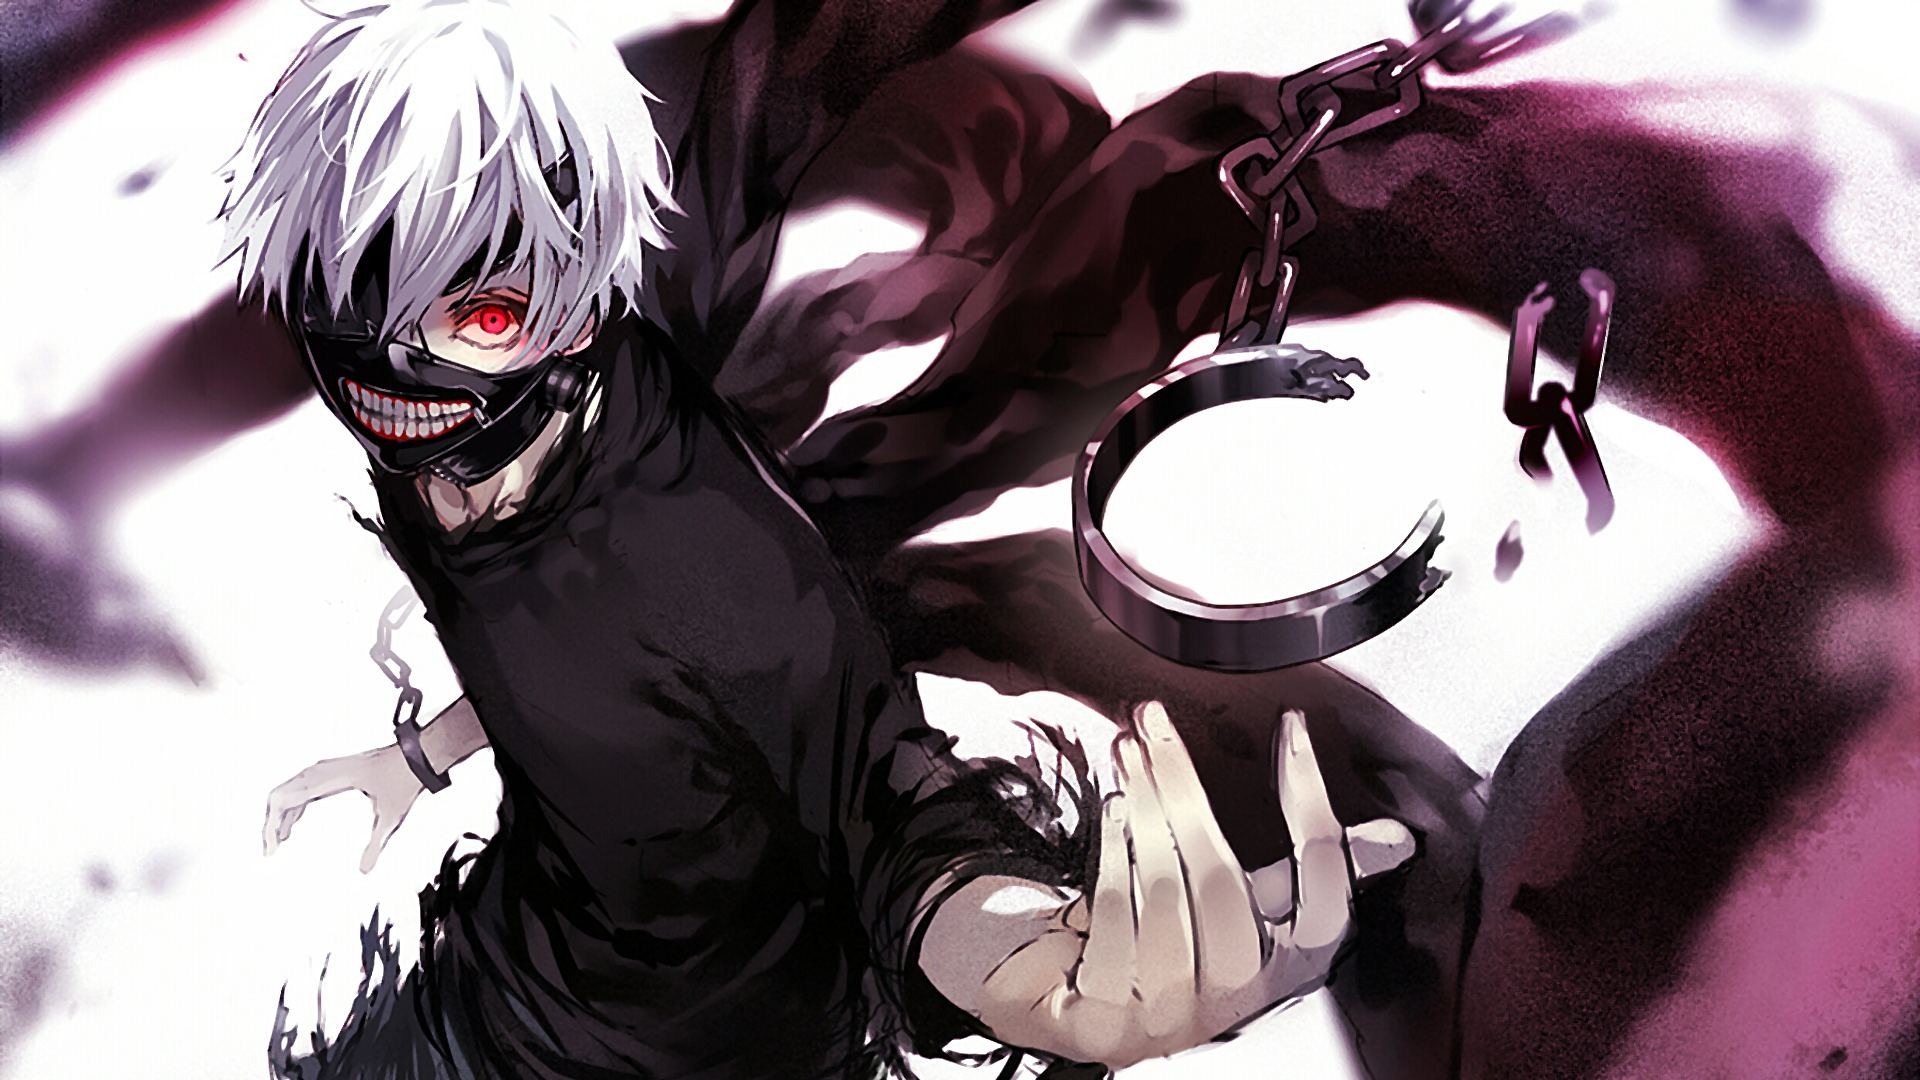 Tokyo Ghoul Anime Hd Wallpaper For Desktop And Mobiles Iphone 7